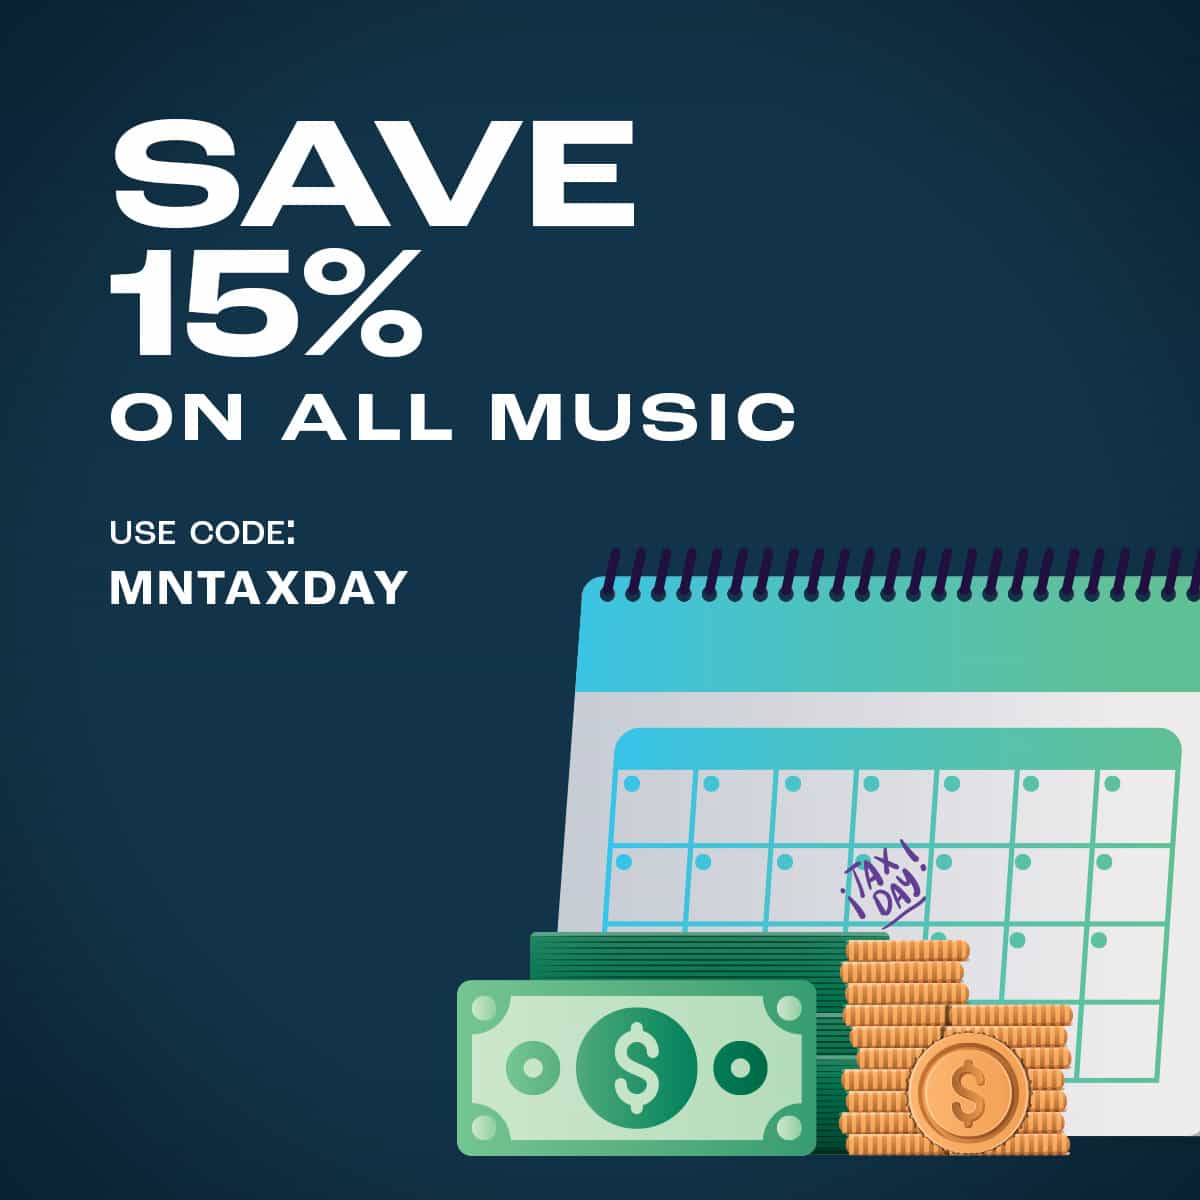 LAST CHANCE! Don't miss out on your chance to save with our Tax Weekend Sale. Take 15% off all sheet music with promo code MNTAXDAY through 11:59 pm CST tonight, only on musicnotes.com! #taxday #taxweekend #sale